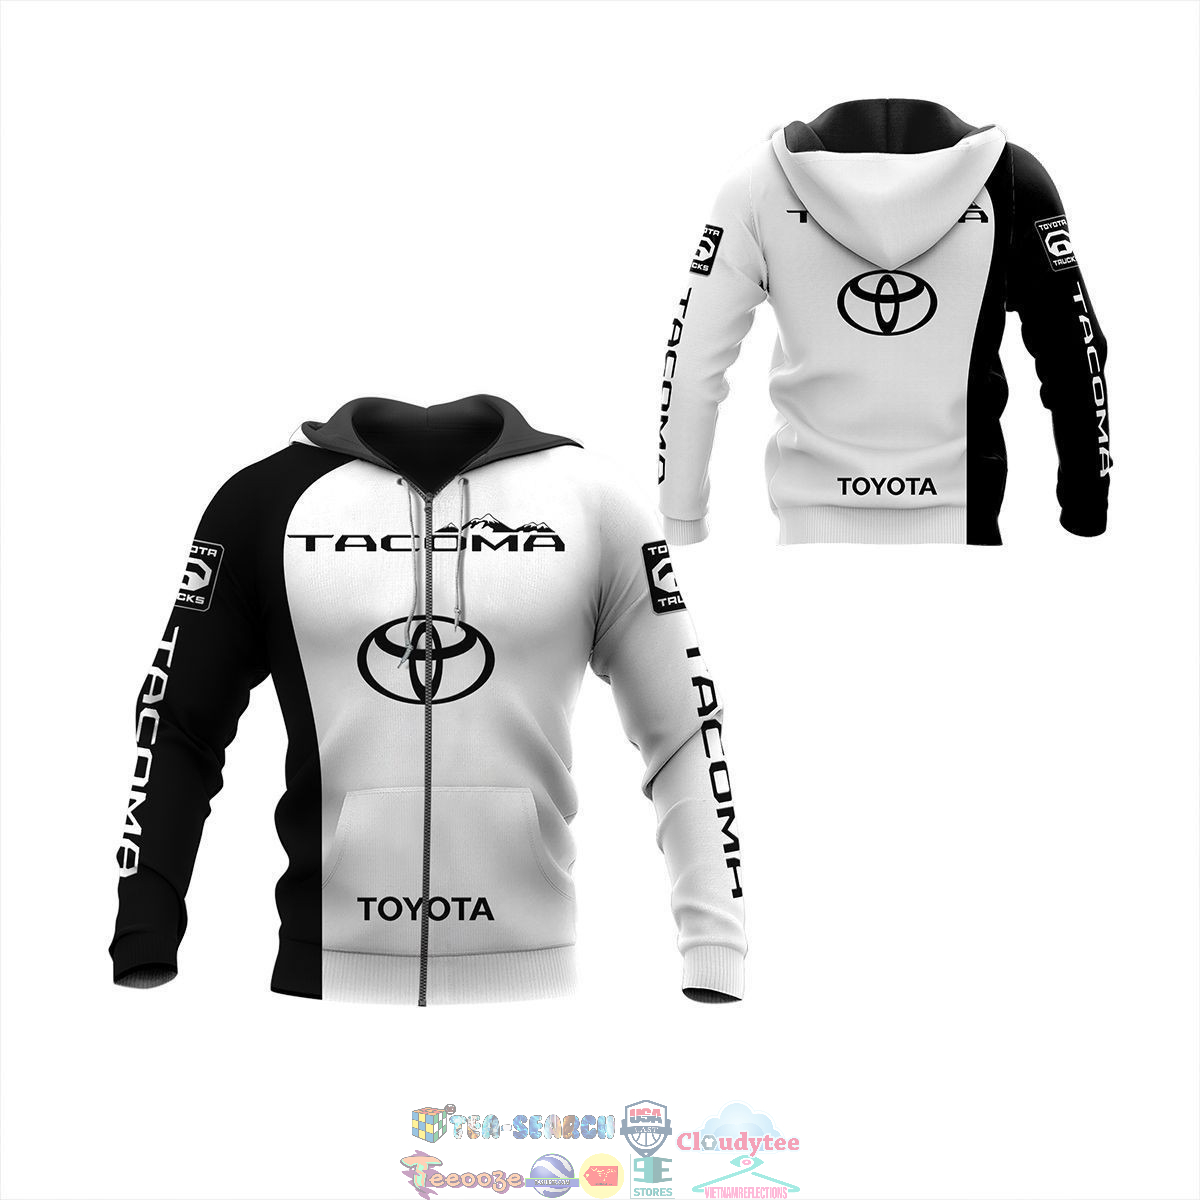 Toyota Tacoma ver 4 3D hoodie and t-shirt